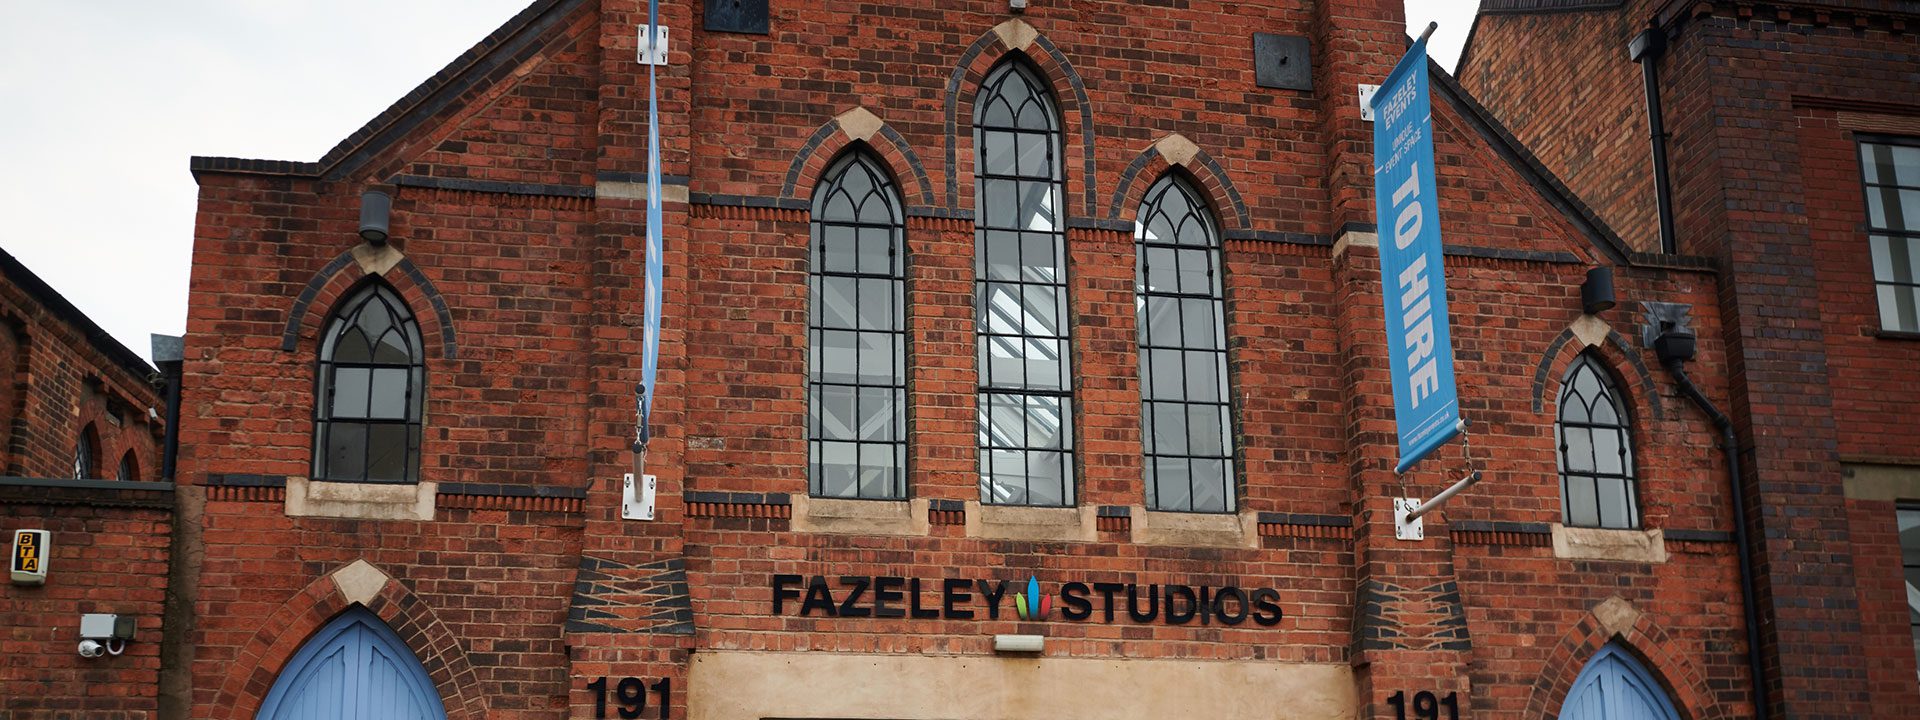 Fazeley Studios logo on old-style building. Banners above the entrance advertise unique event space to hire.